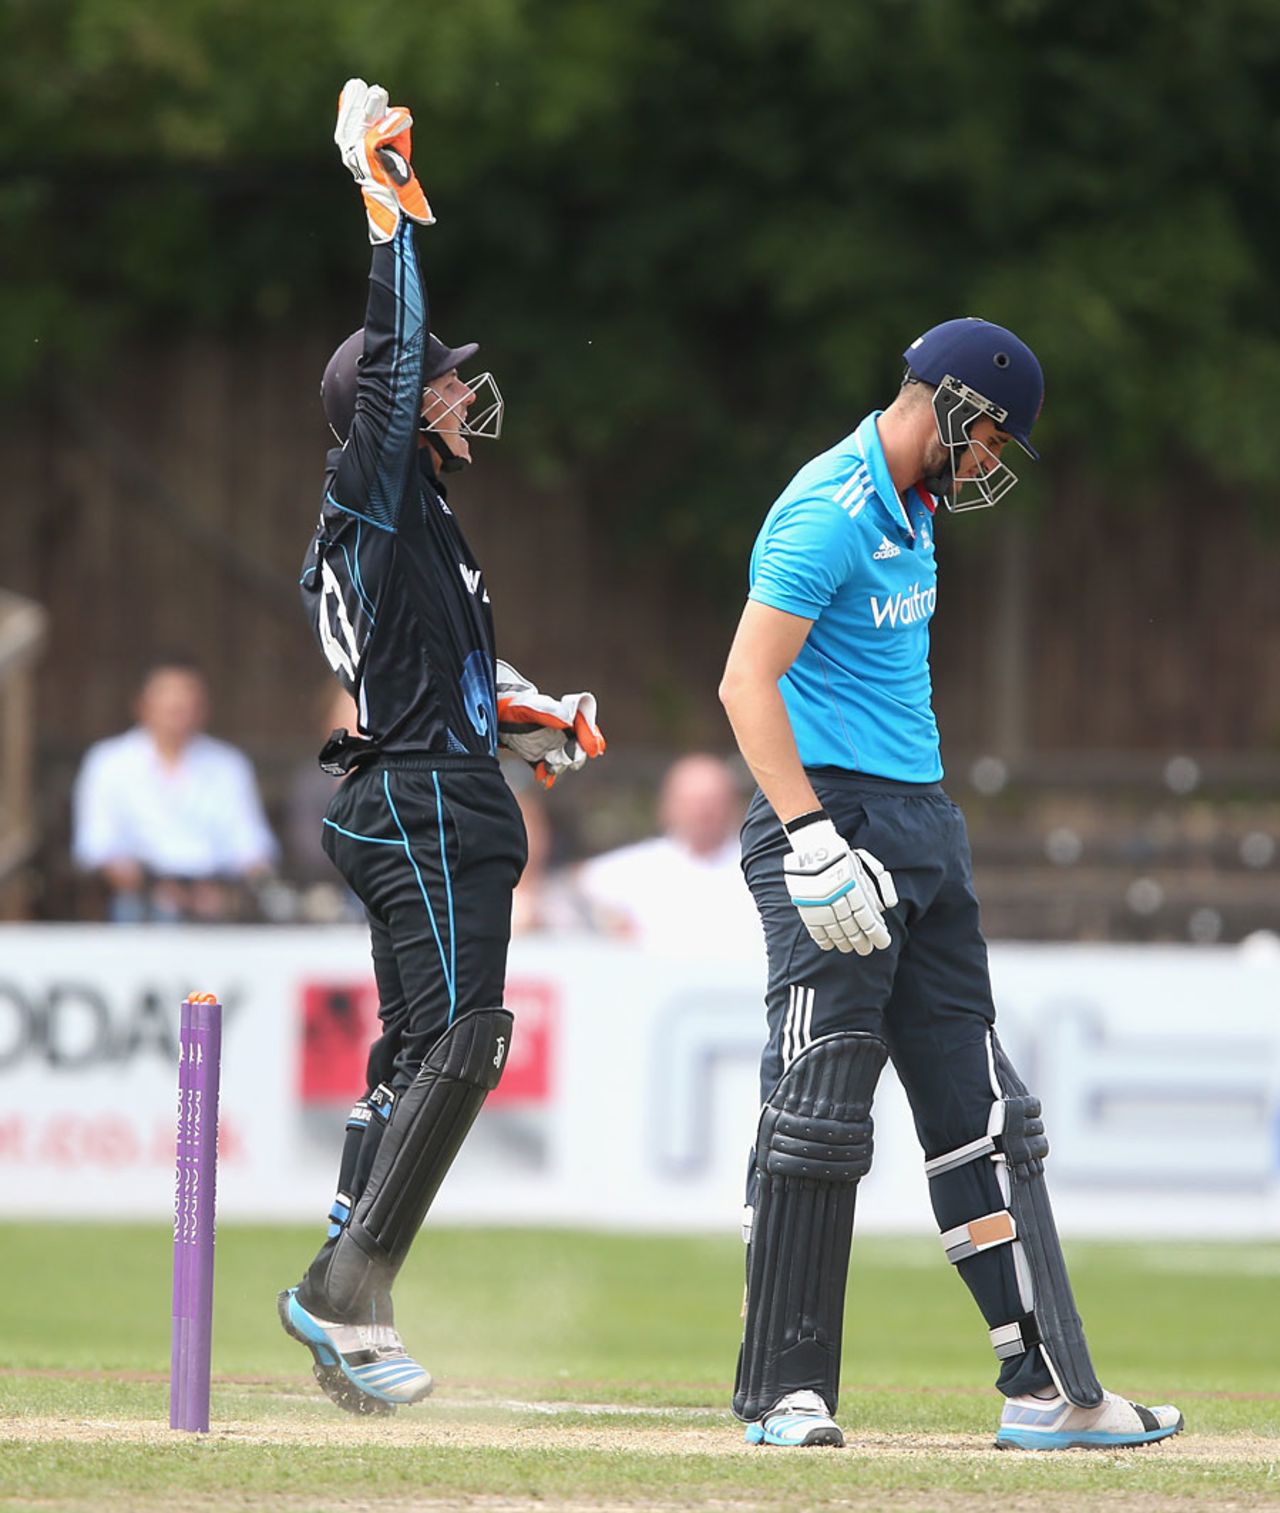 BJ Watling appeals for the catch to remove Alex Hales, England Lions v New Zealand A, Tri-series, New Road, August 12, 2014